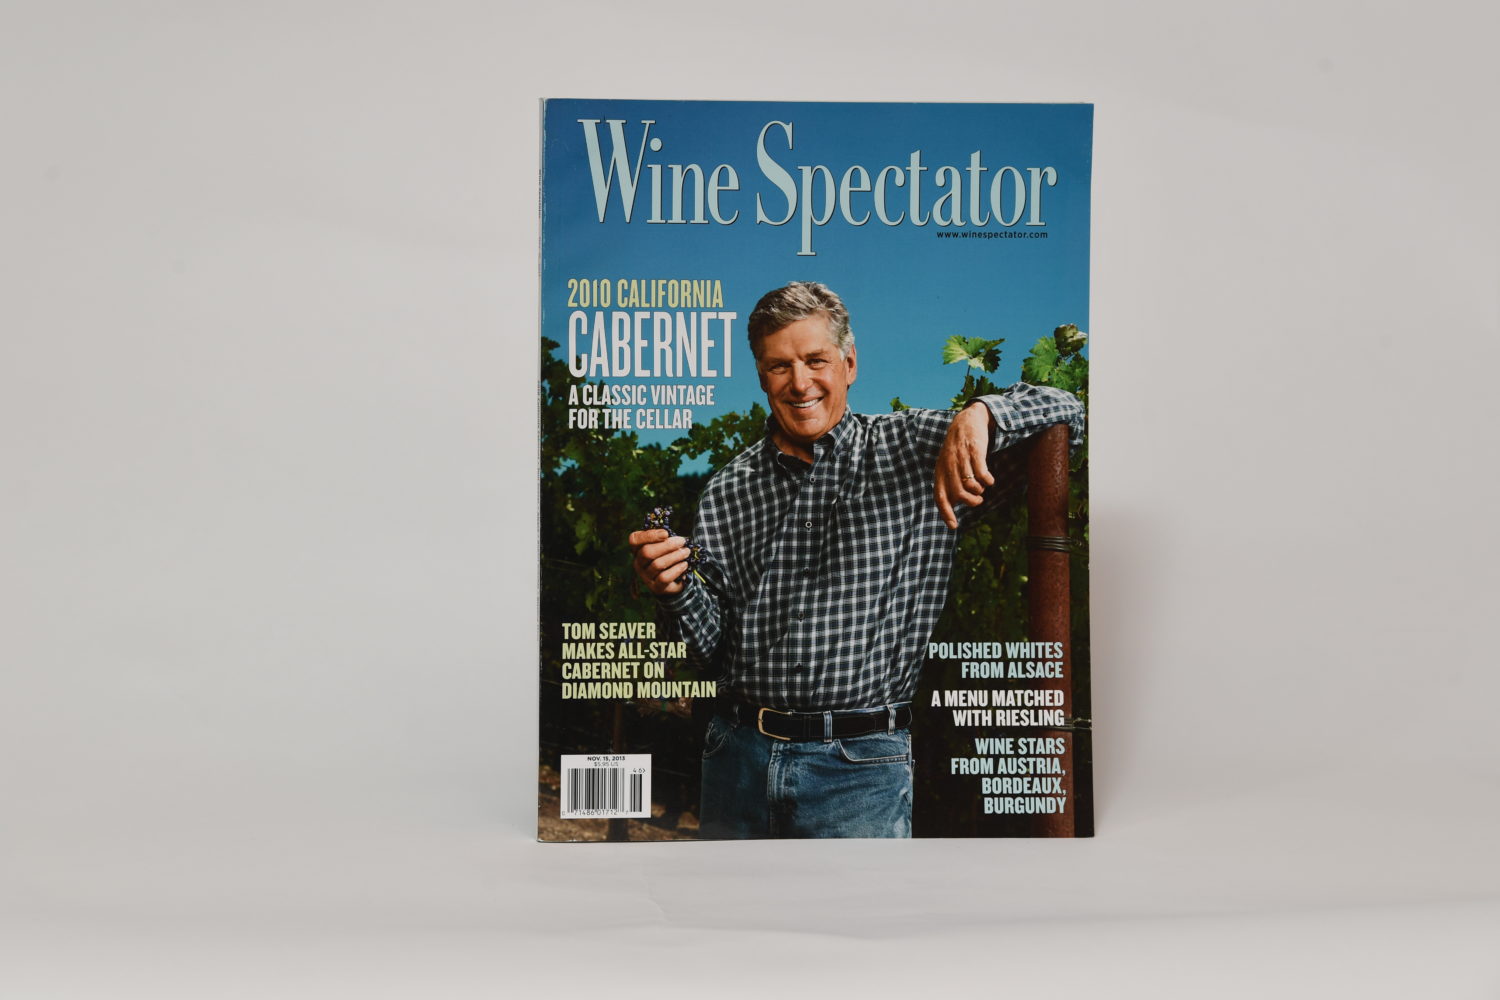 Cover of Wine Spectator magazine with Tom Seaver smiling while holding a vine